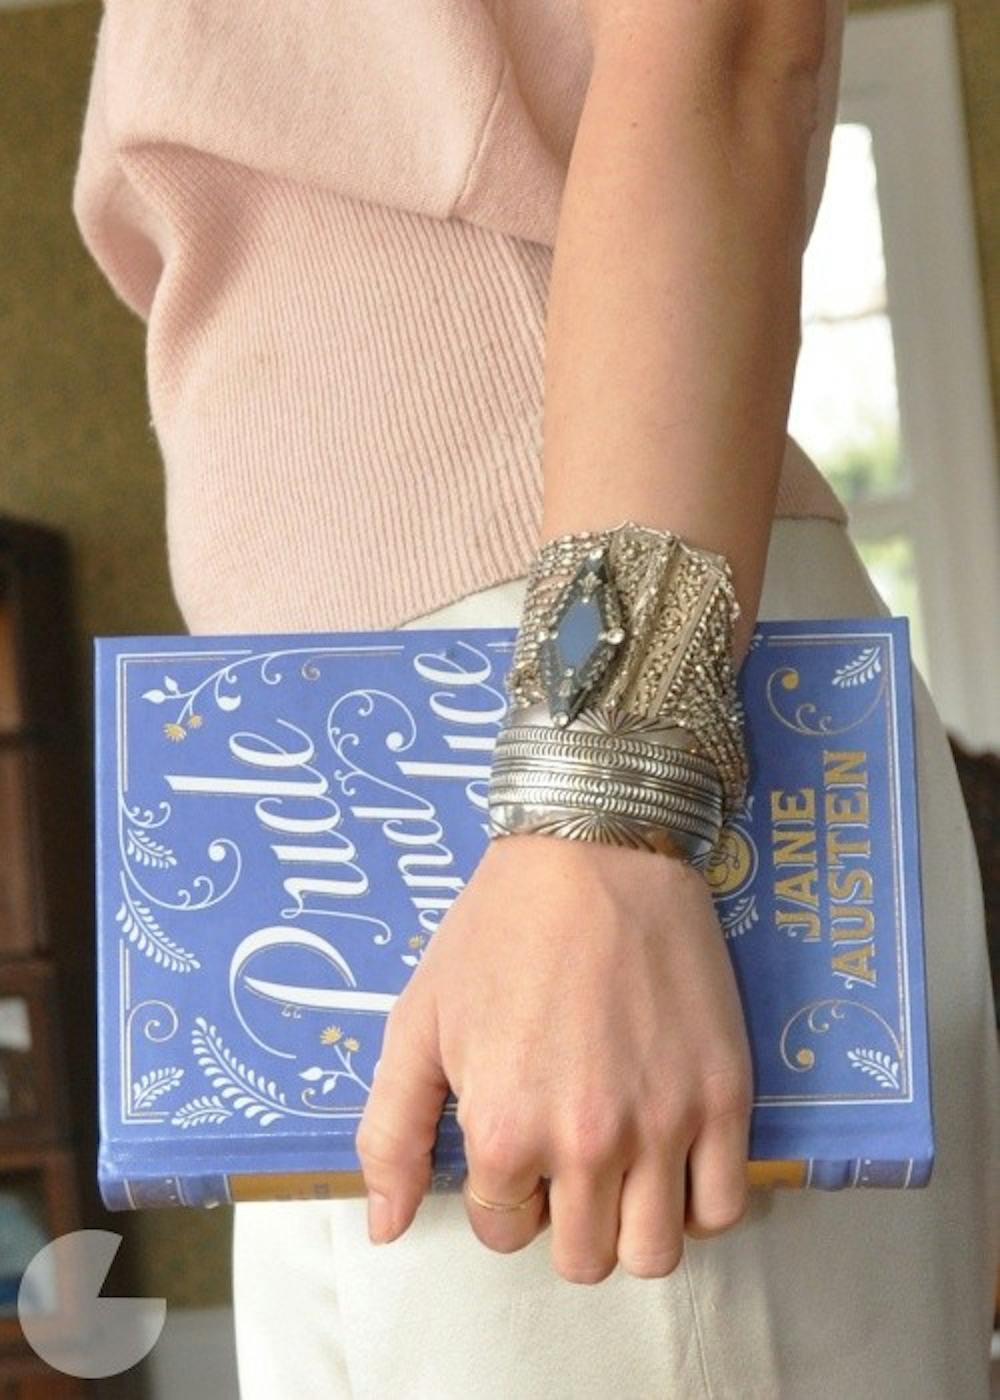 An amazing book clutch for your night out! Photo from Runway DIY.